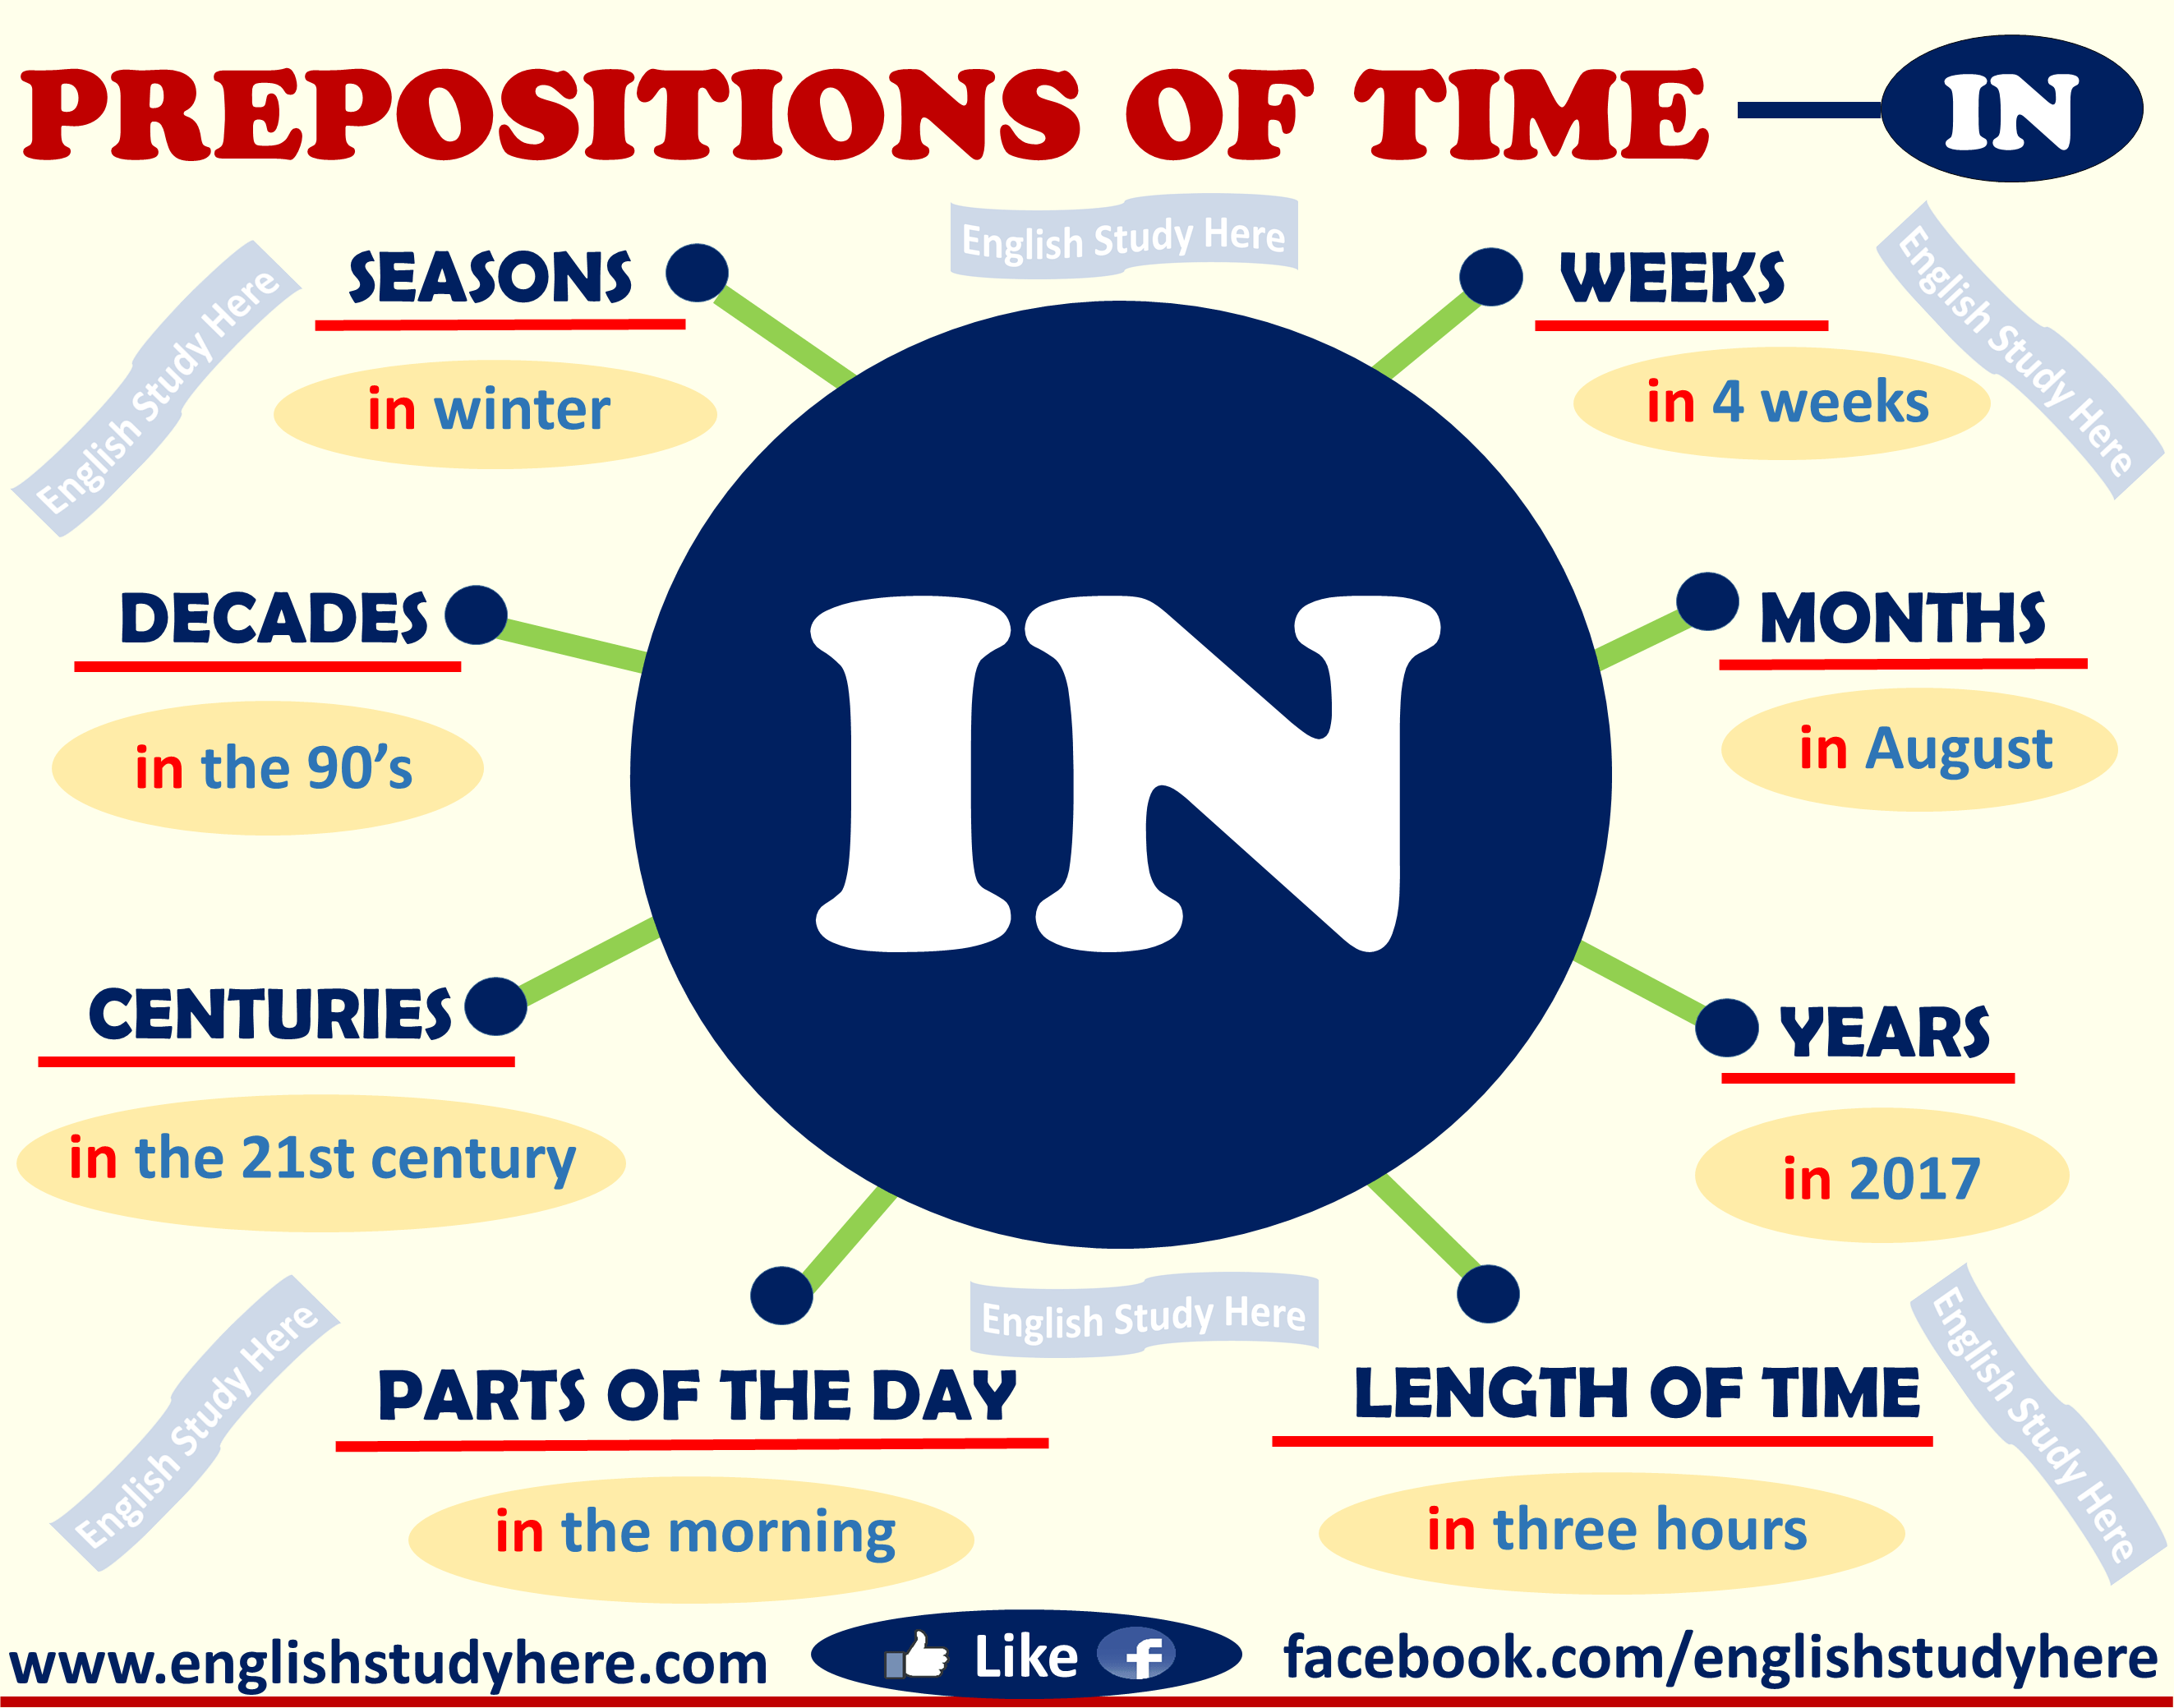 prepositions-of-time-in-english-study-here